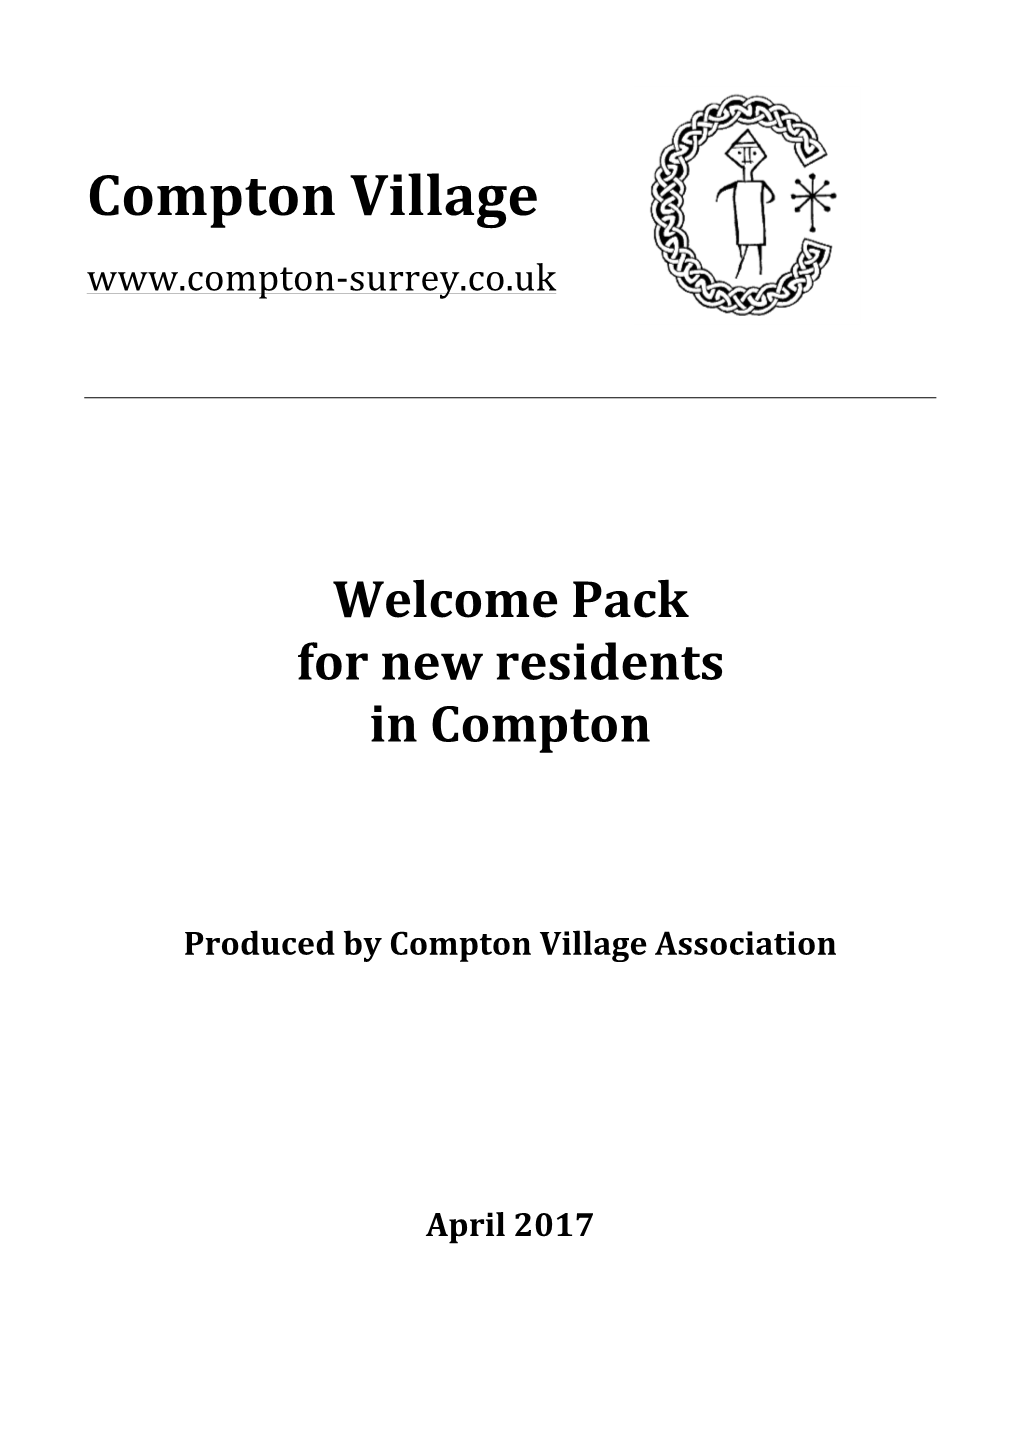 WELCOME PACK April 2017